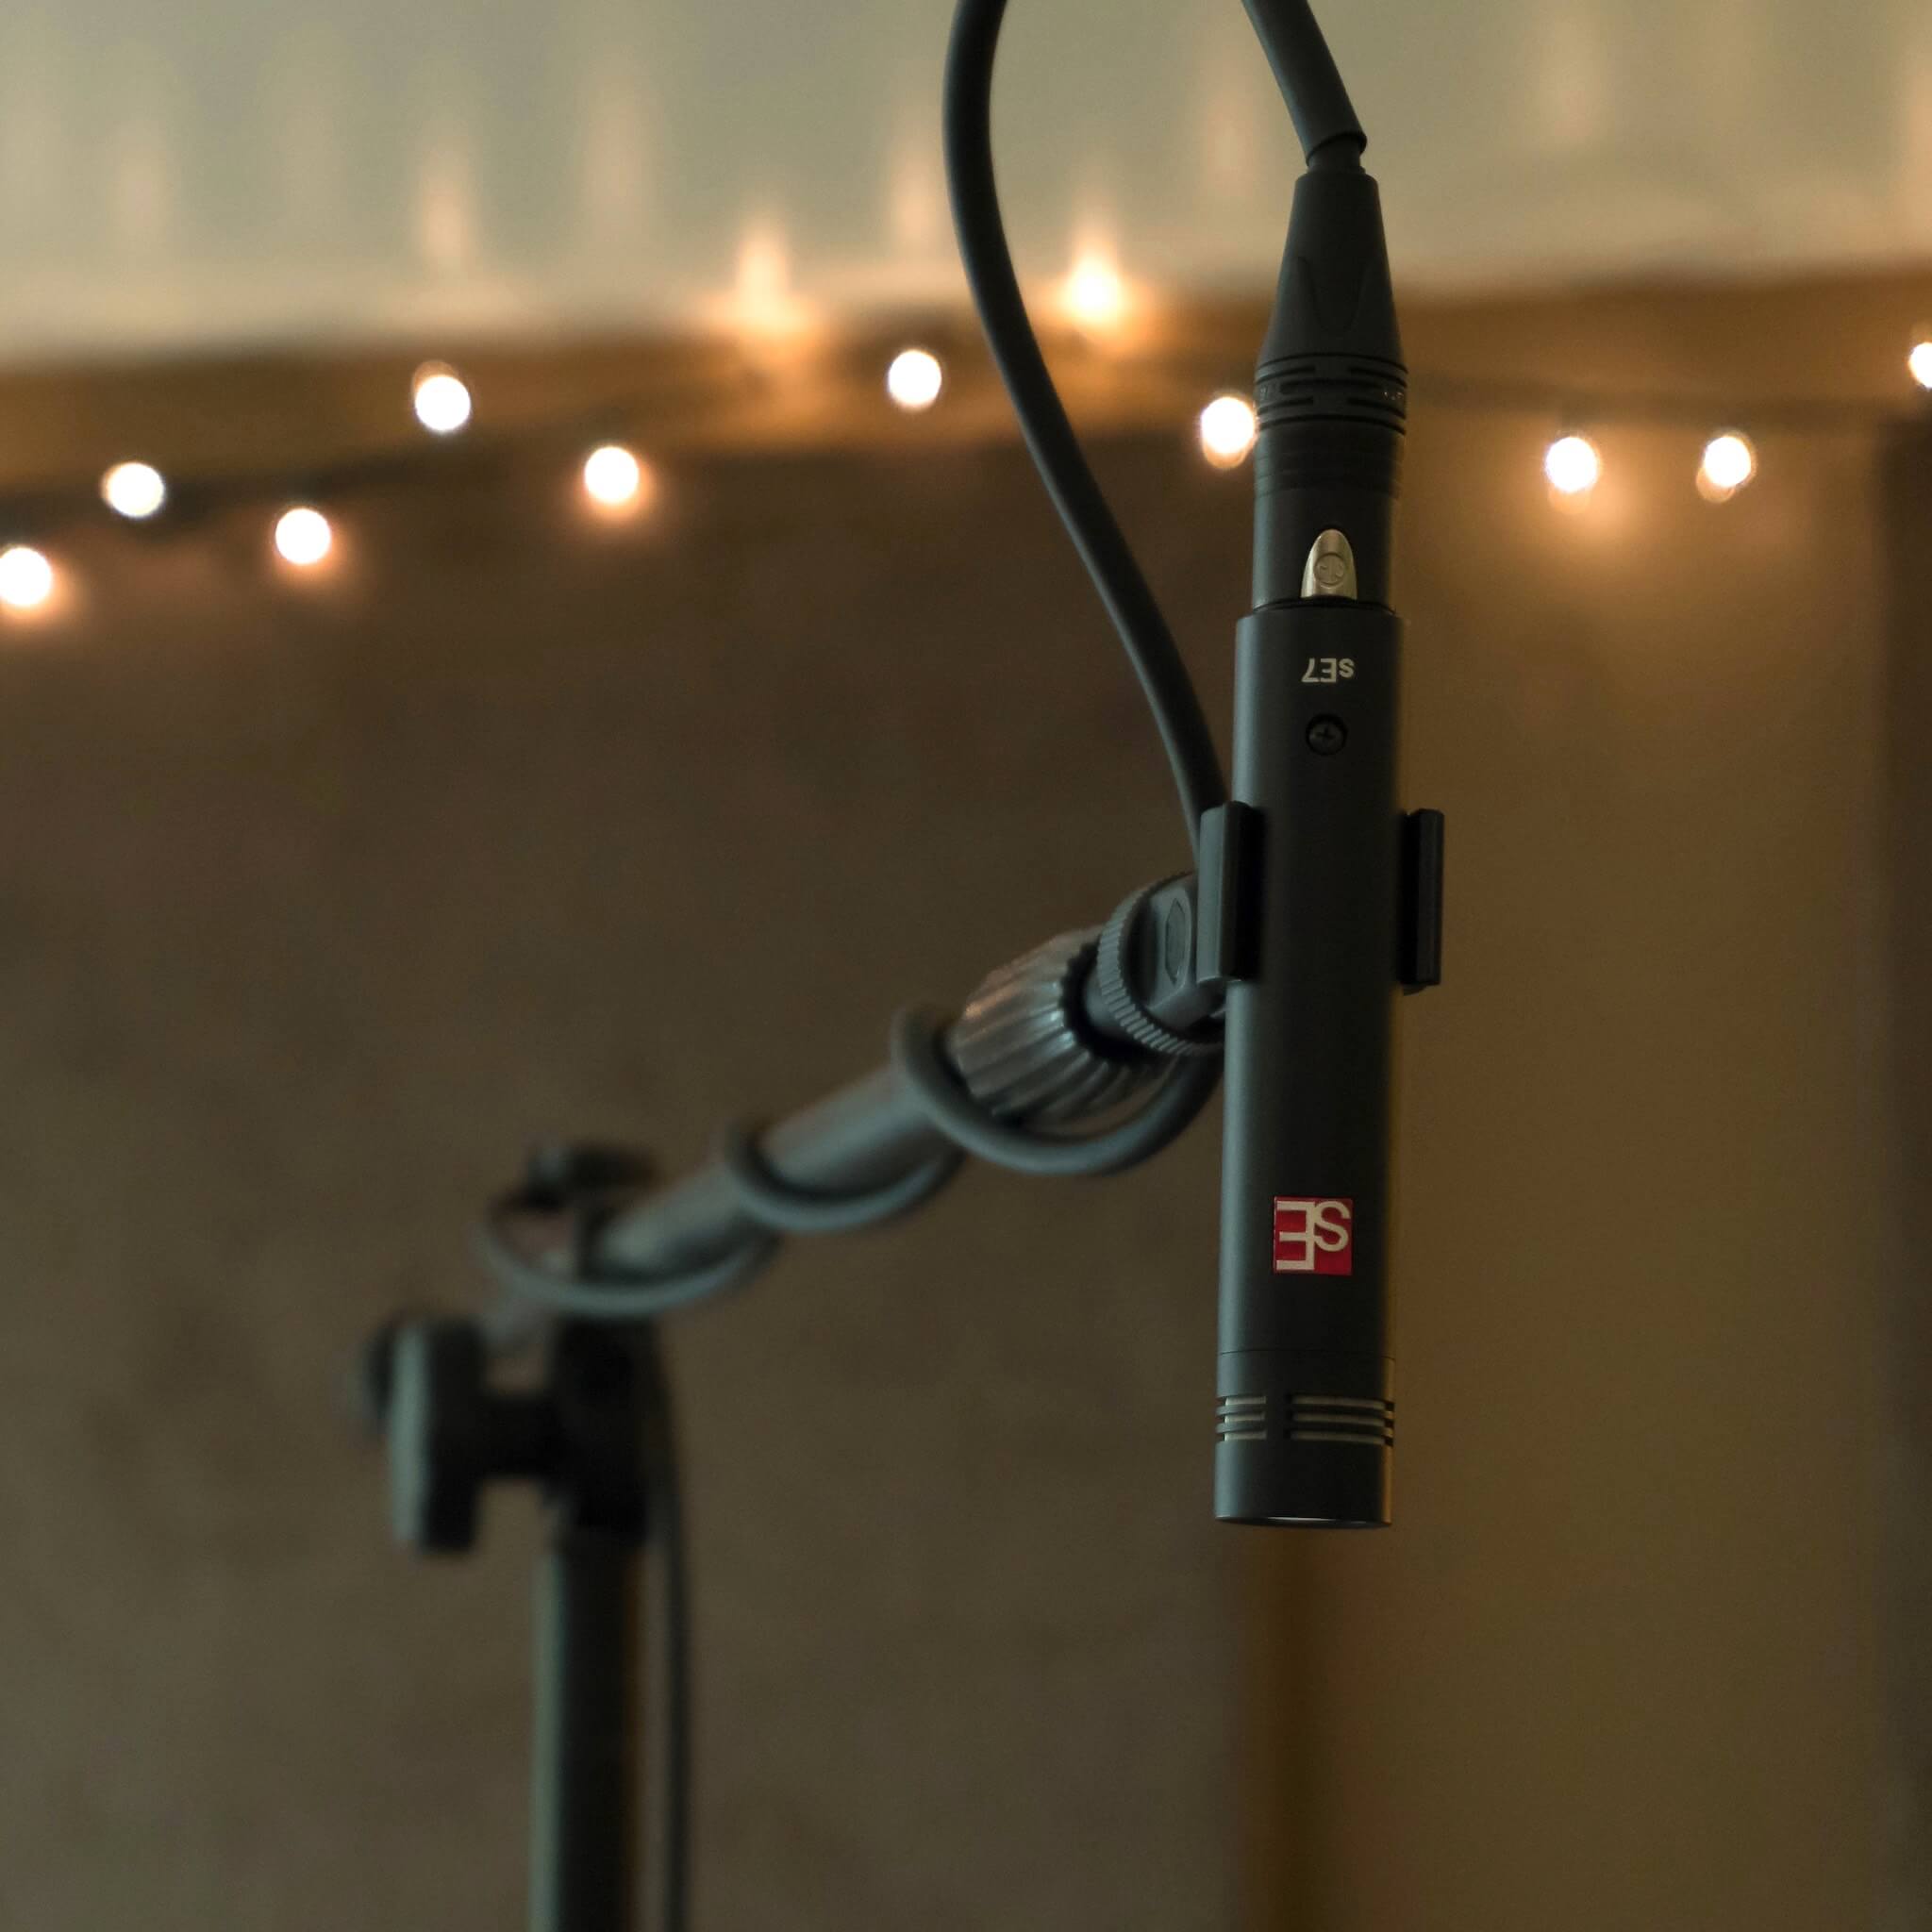 sE Electronics sE7 - Small Diaphragm Cardioid Condenser Microphone, in use overhead